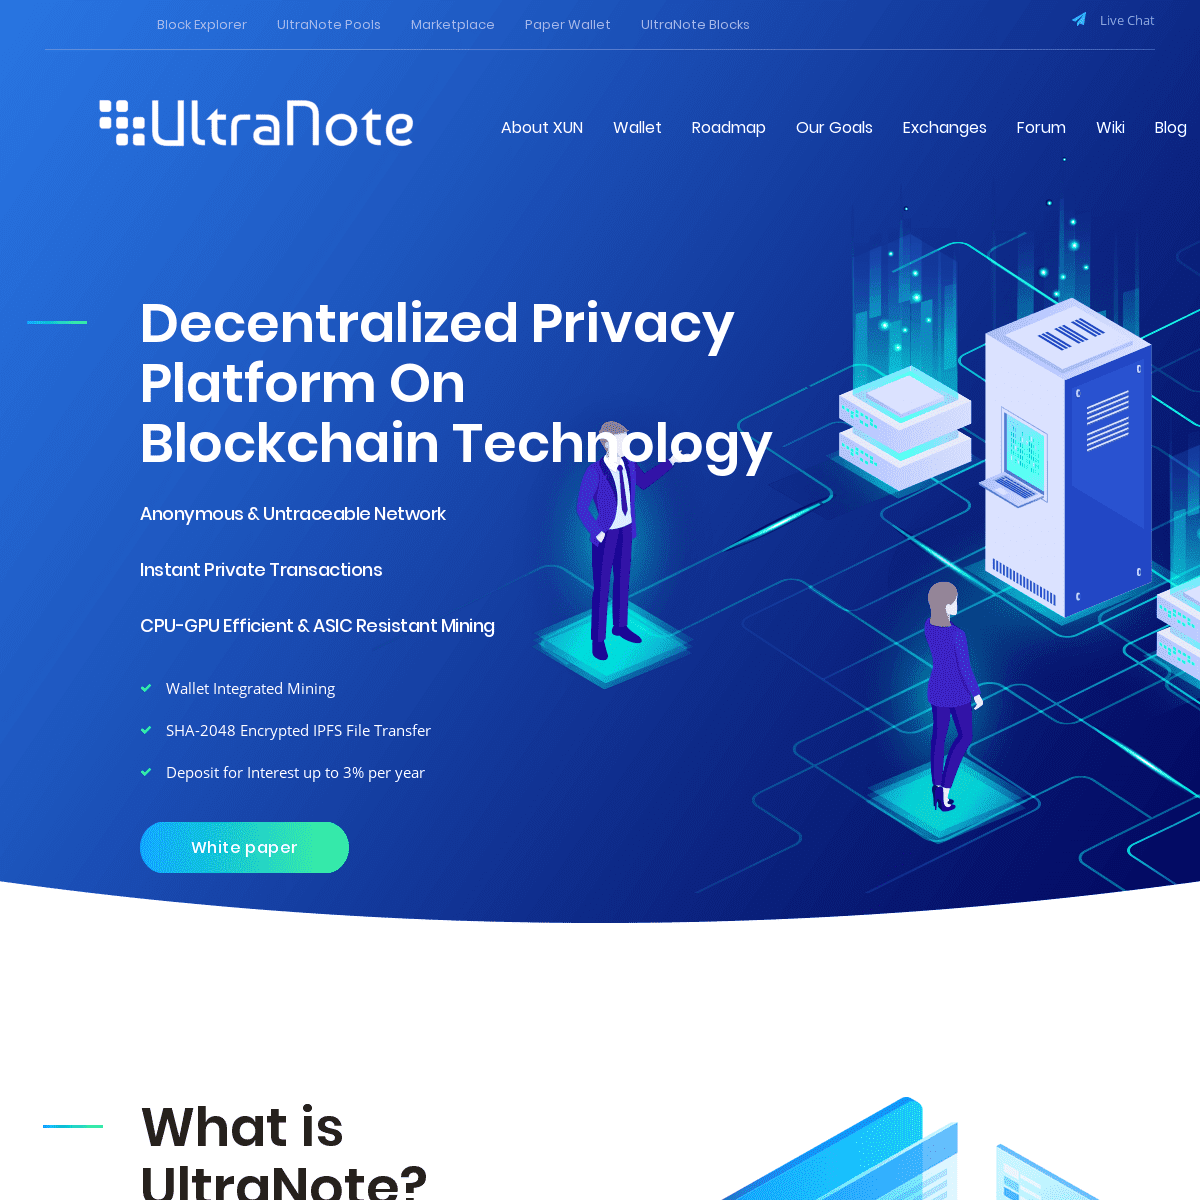 UltraNote - XUN digital cryptocurrency coin